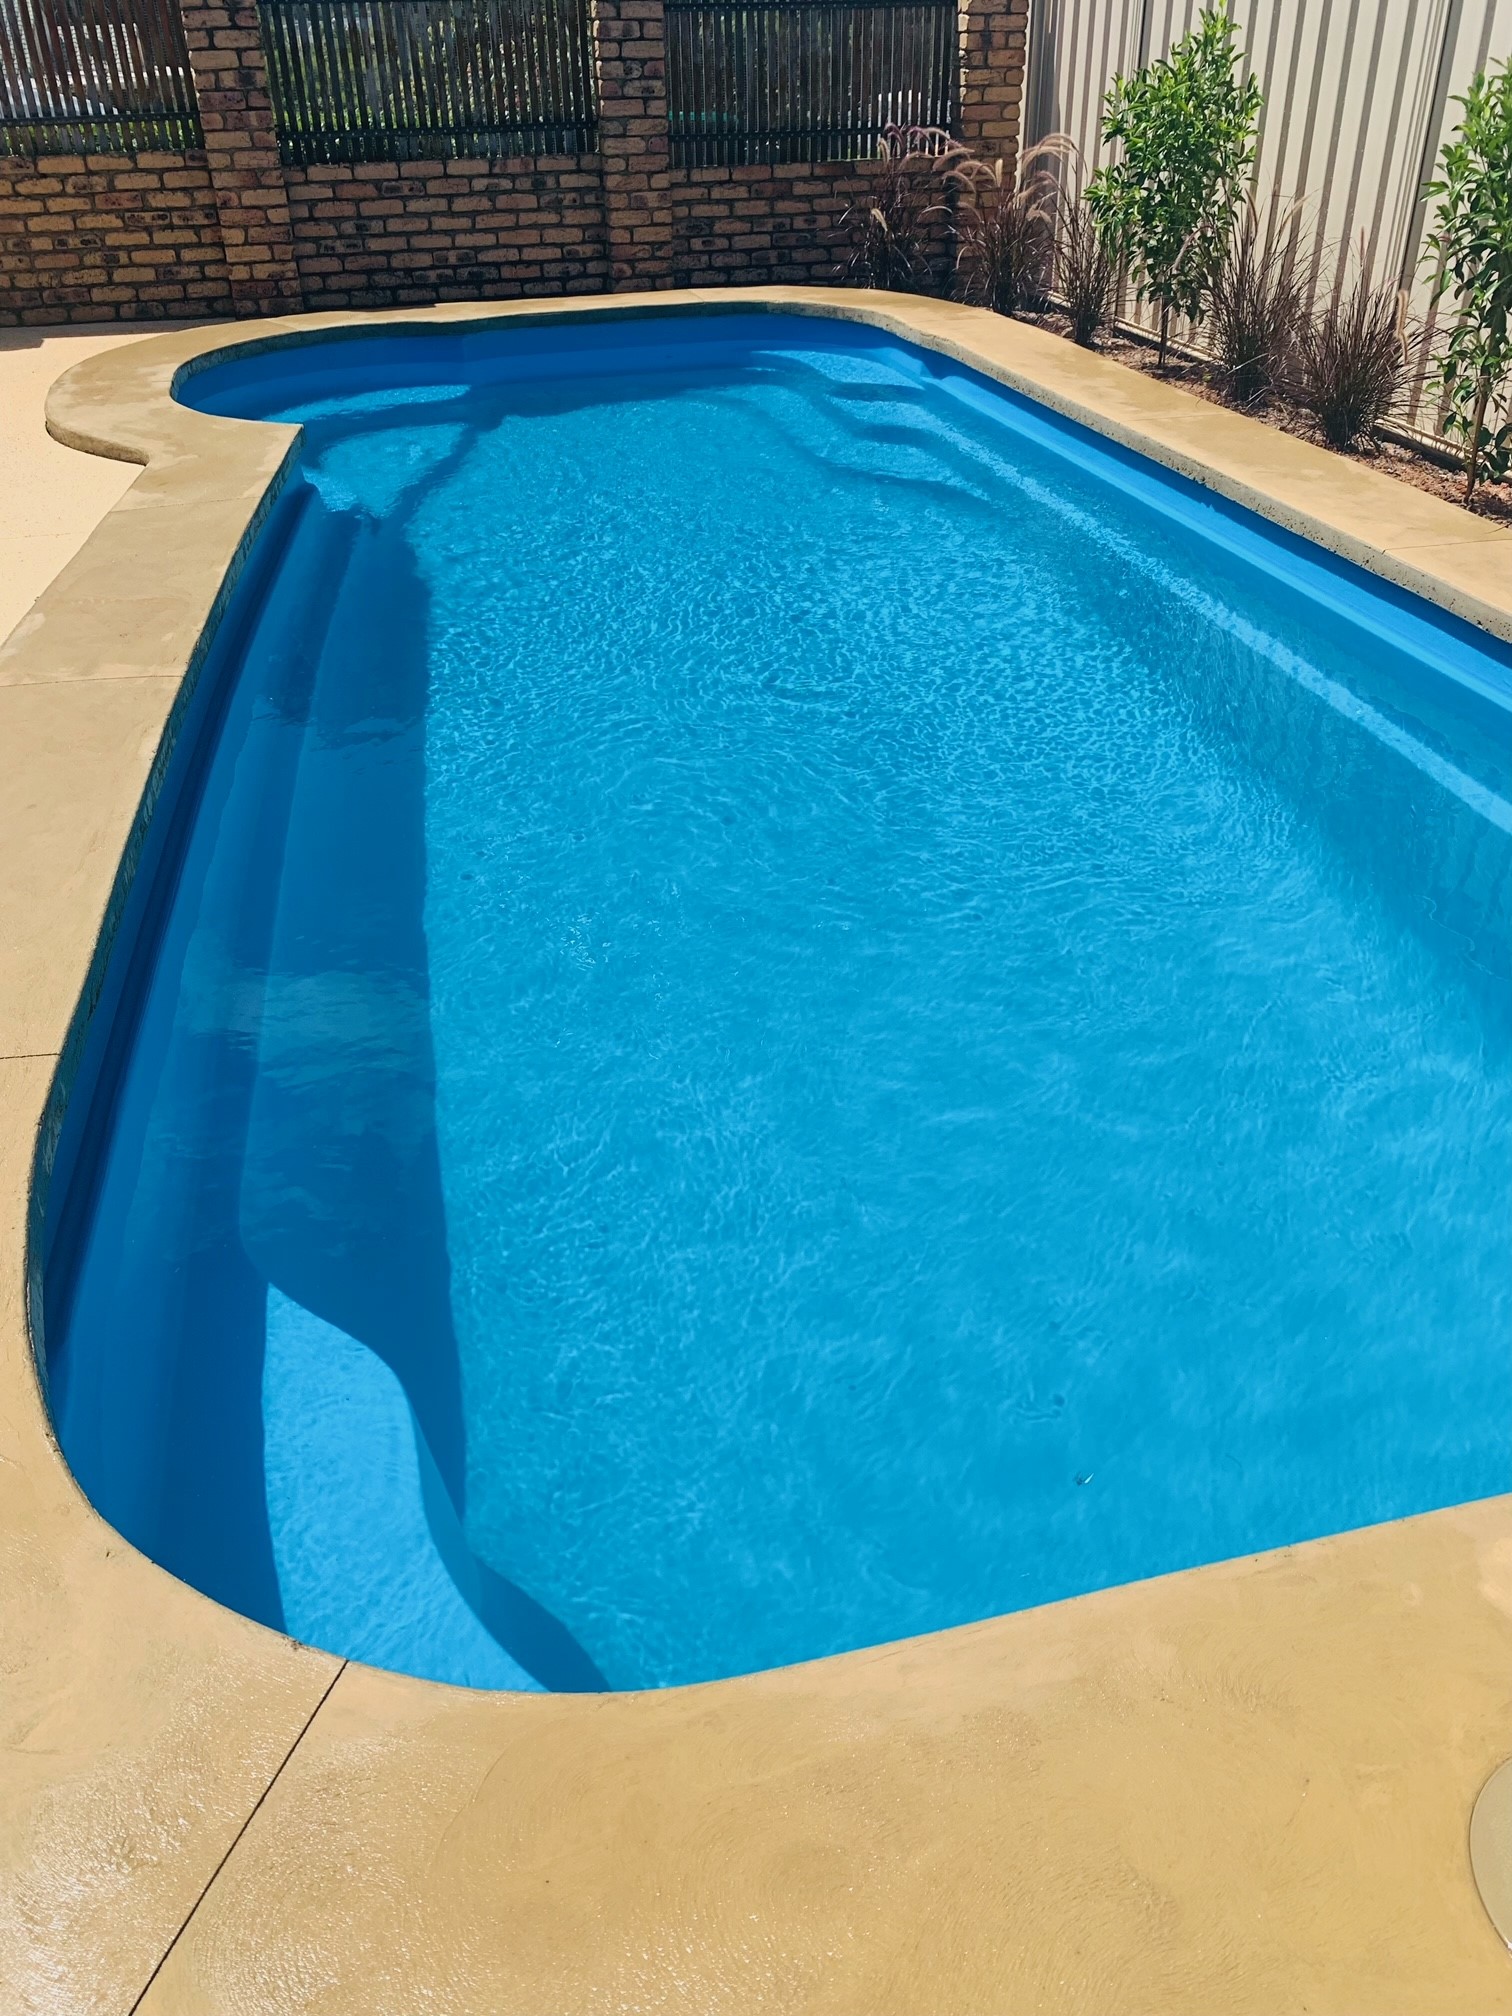 Pool painted with LUXAPOOL Mid Blue Pool Paint - Jan 2023_filled with water_Daryl_Burrell_Sunshine Coast_11